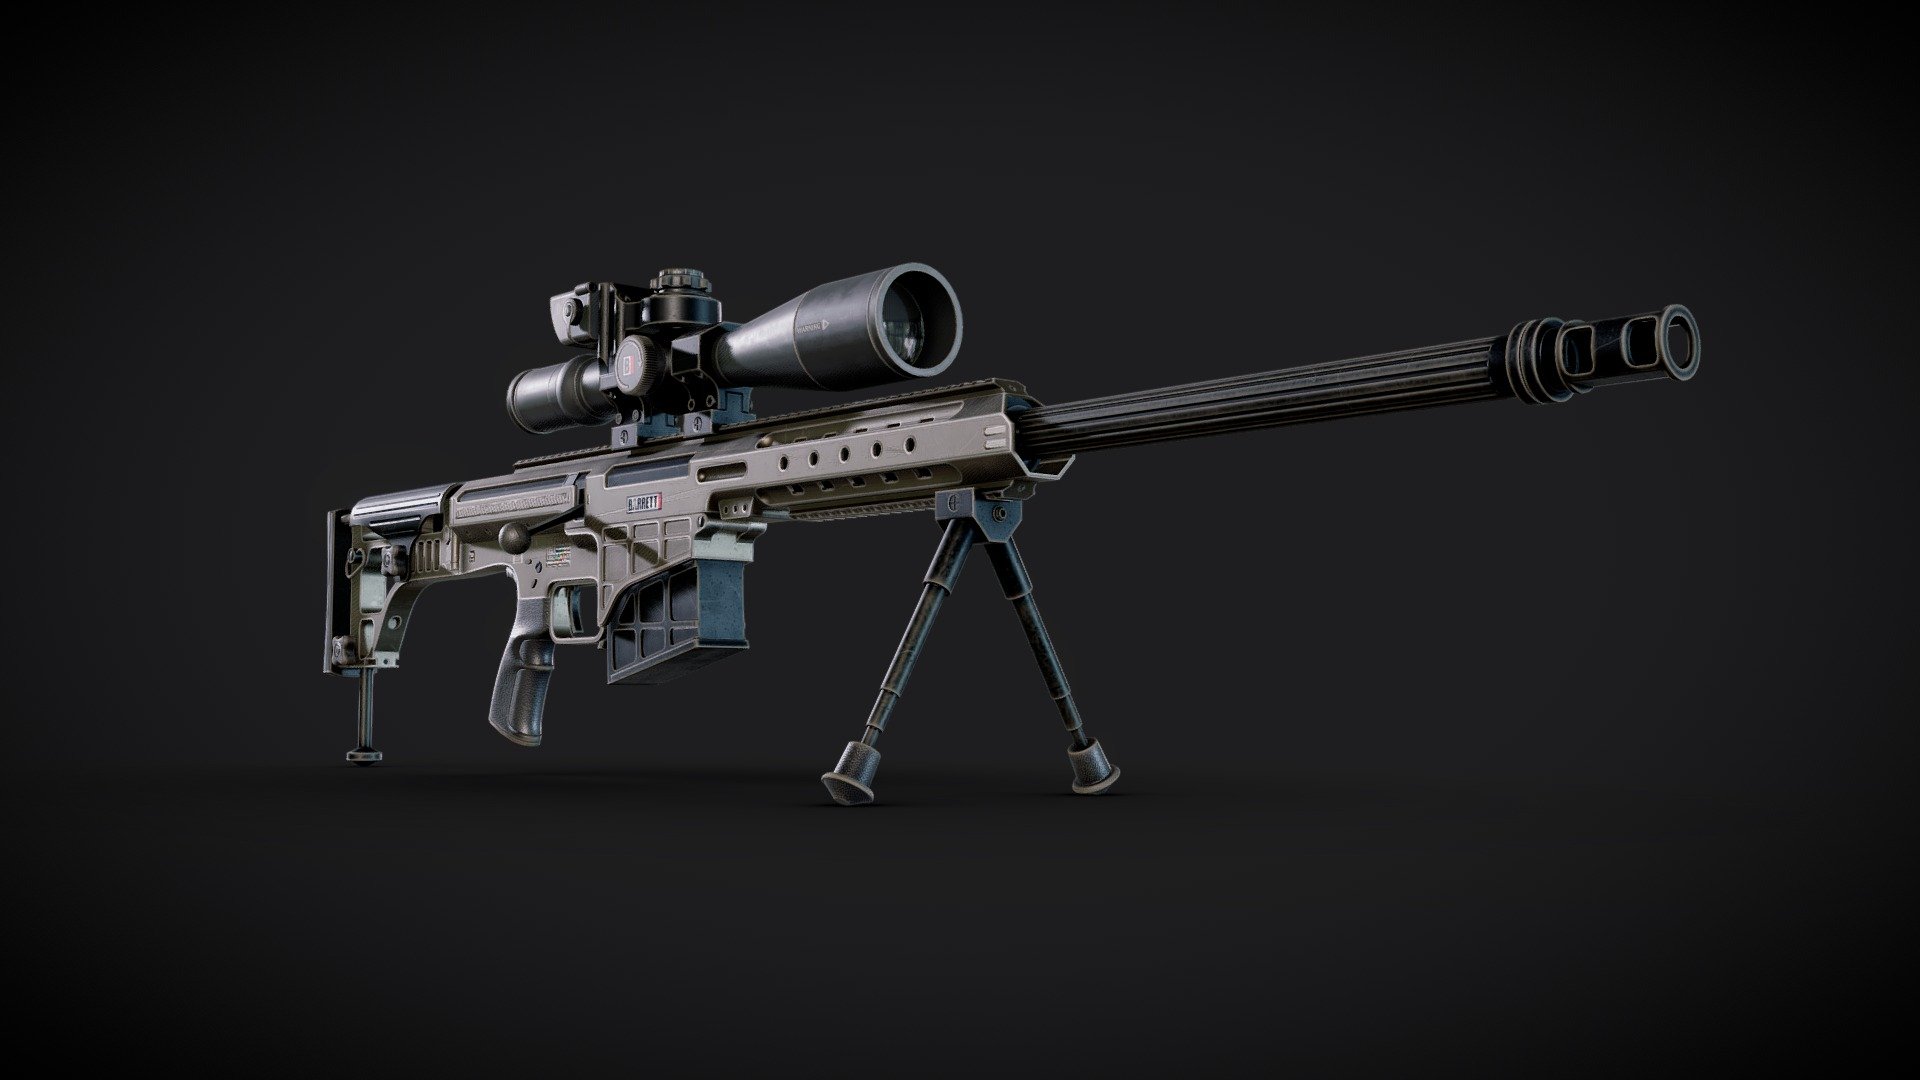 Realtime 3D Sniper modeled in 3ds max and Rendered in Unreal Engine. Substance Painter is used to create high-quality PBR material. Highly optimized for use on any platform.

You may also like: https://sketchfab.com/3d-models/vhs-2-rifle-3d-fae7df8eef4440509cad6fbcfa894372

To learn more about products &amp; services go to:
Website: http://www.dreamerzlab.com
Like, Subscribe &amp; Follow:
Facebook: https://www.facebook.com/dreamerzlab
YouTube: https://www.youtube.com/channel/UCBxy&hellip;
Linkedin: https://www.linkedin.com/company/drea&hellip;
Twitter: https://twitter.com/dreamerz_lab
Instagram: https://www.instagram.com/dreamerzlabltd
Email: info@dreamerzlab.com 
Call: +8801675110479 - 3D Sniper - 3D model by Dreamerz Lab (@dreamerzlab) 3d model